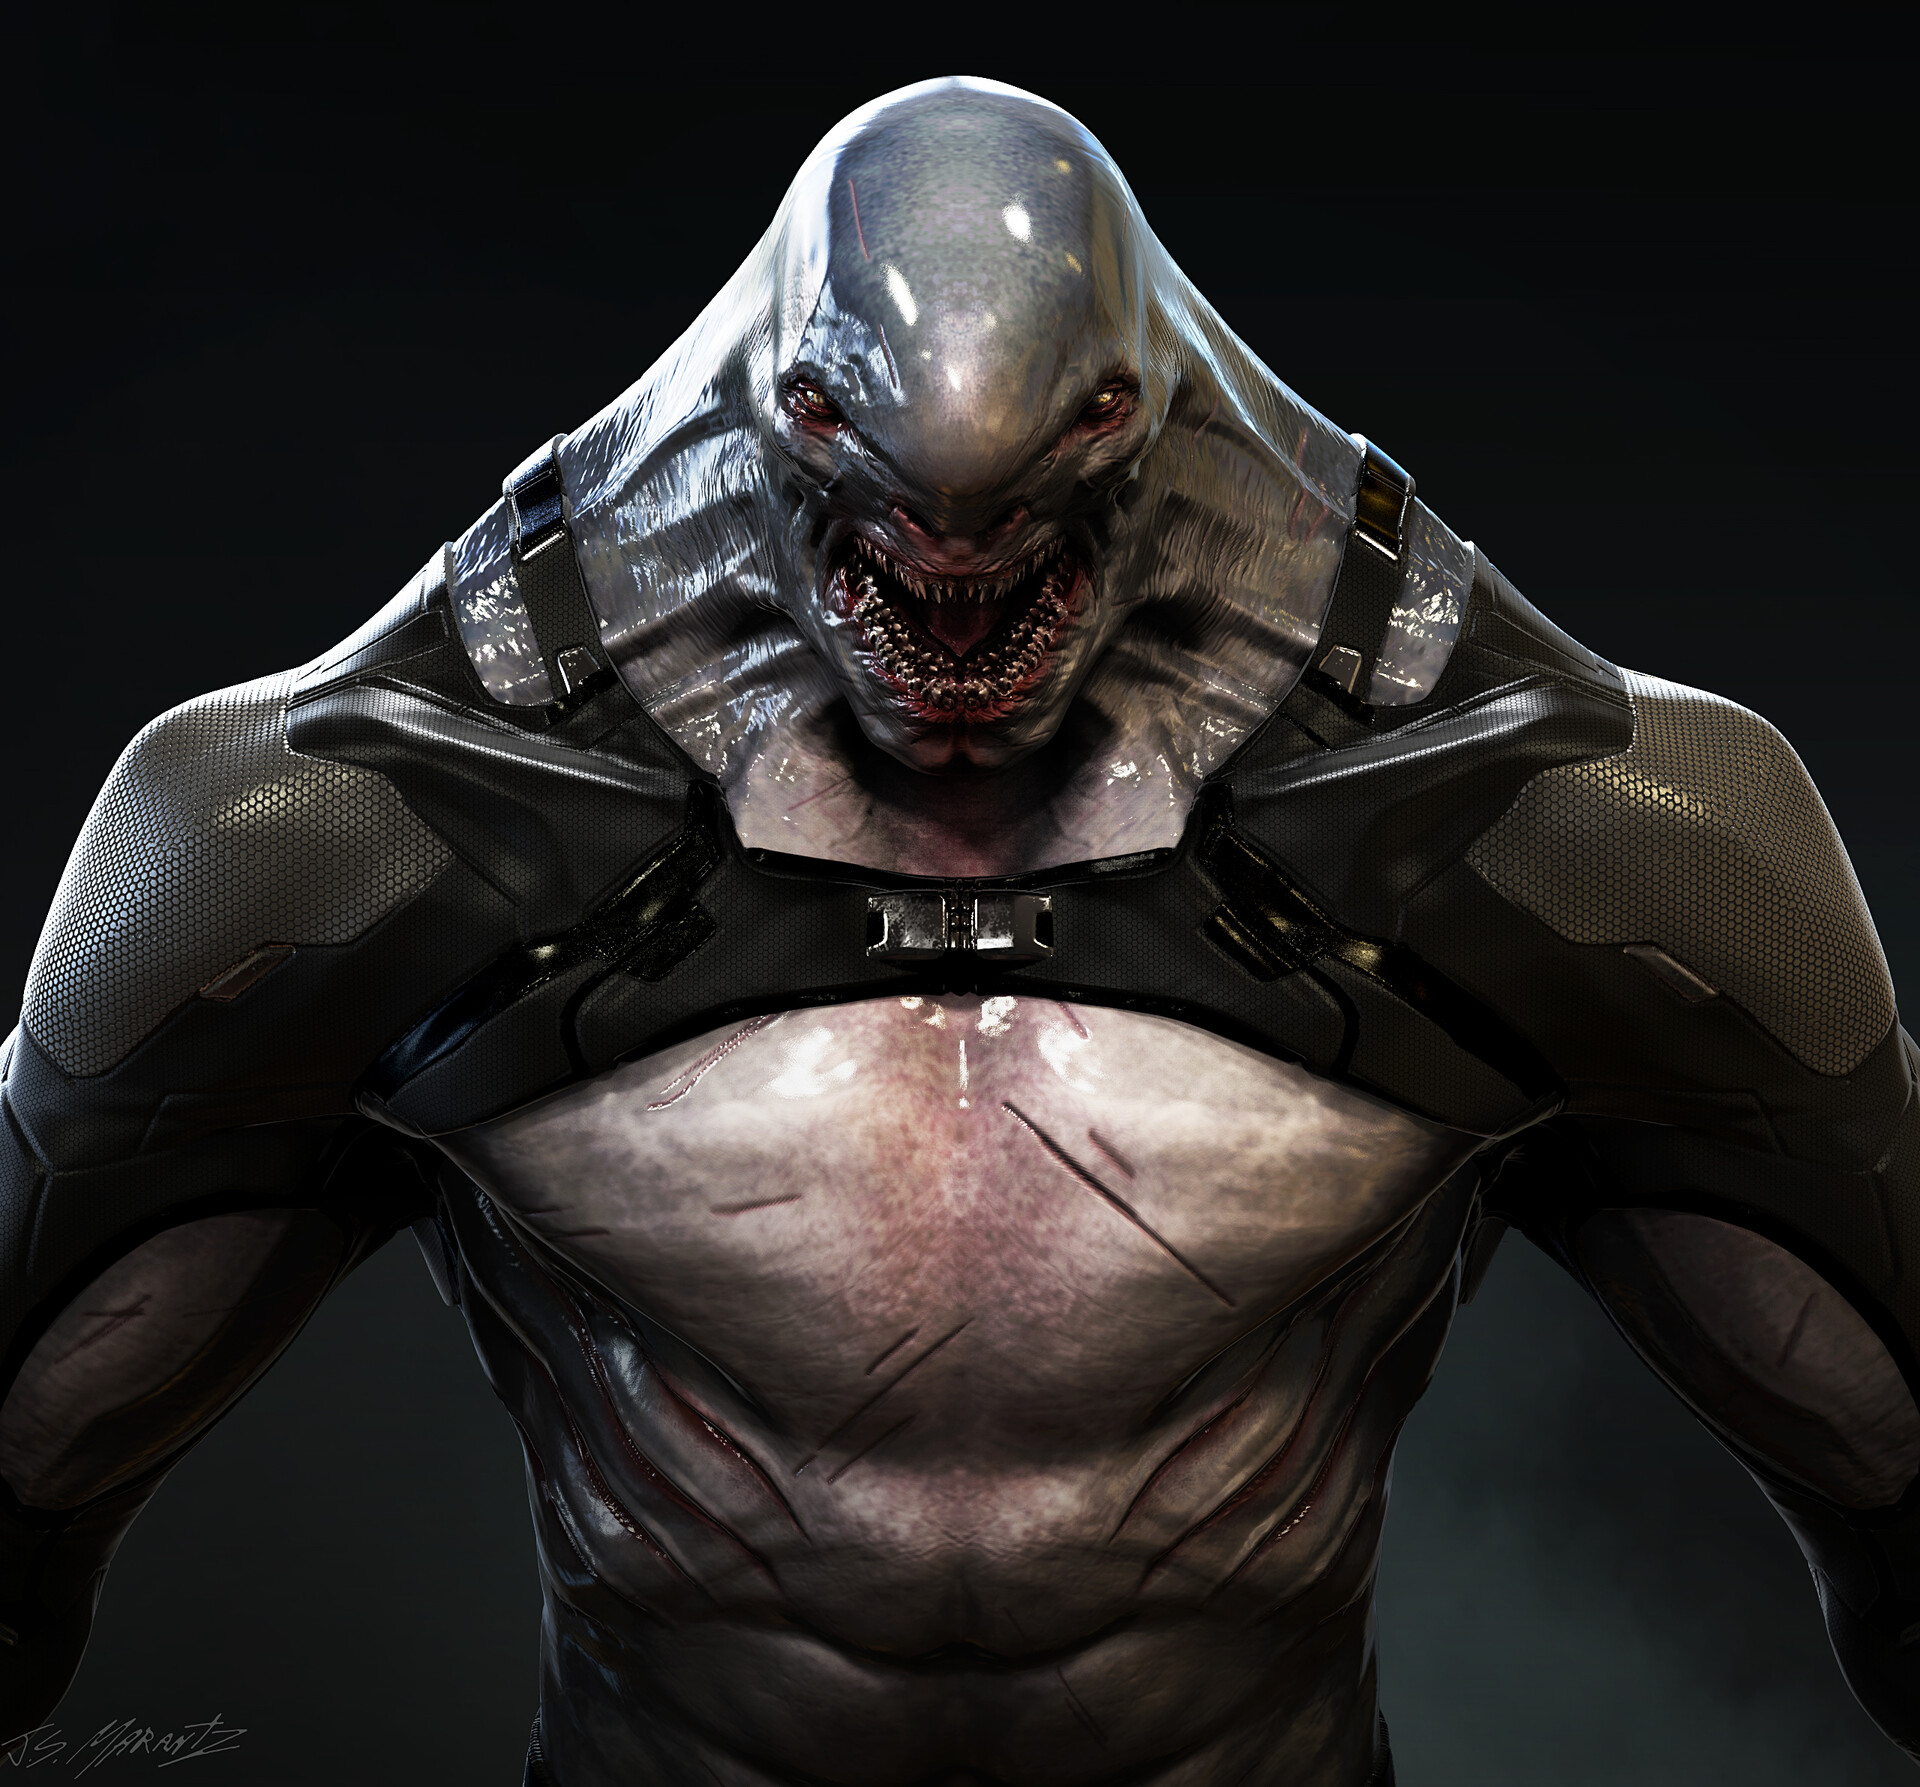 KING SHARK DESIGN for a cancelled game.